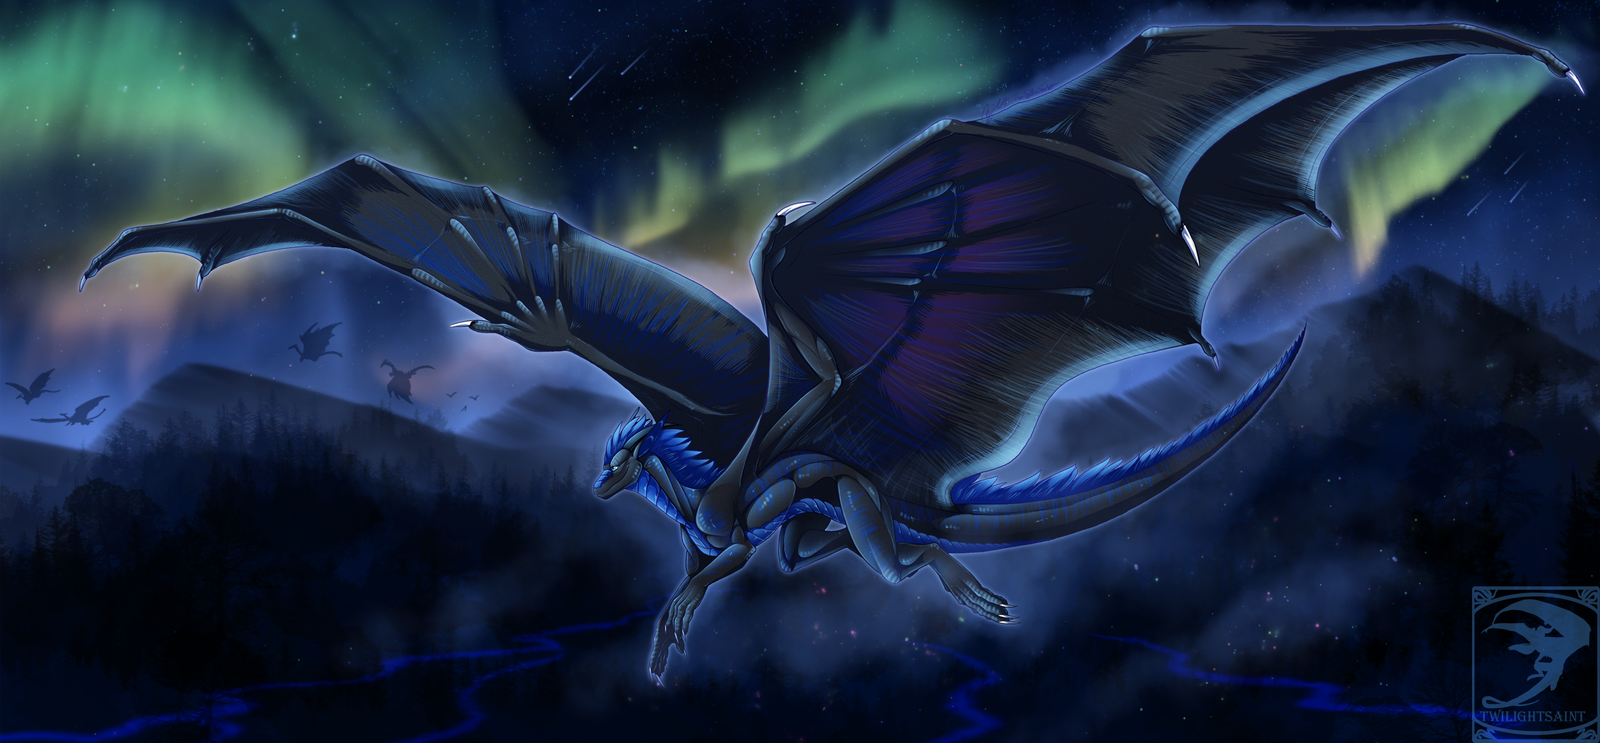 comish___leading_the_night_by_twilightsaint_d6jbjjo-fullview.png